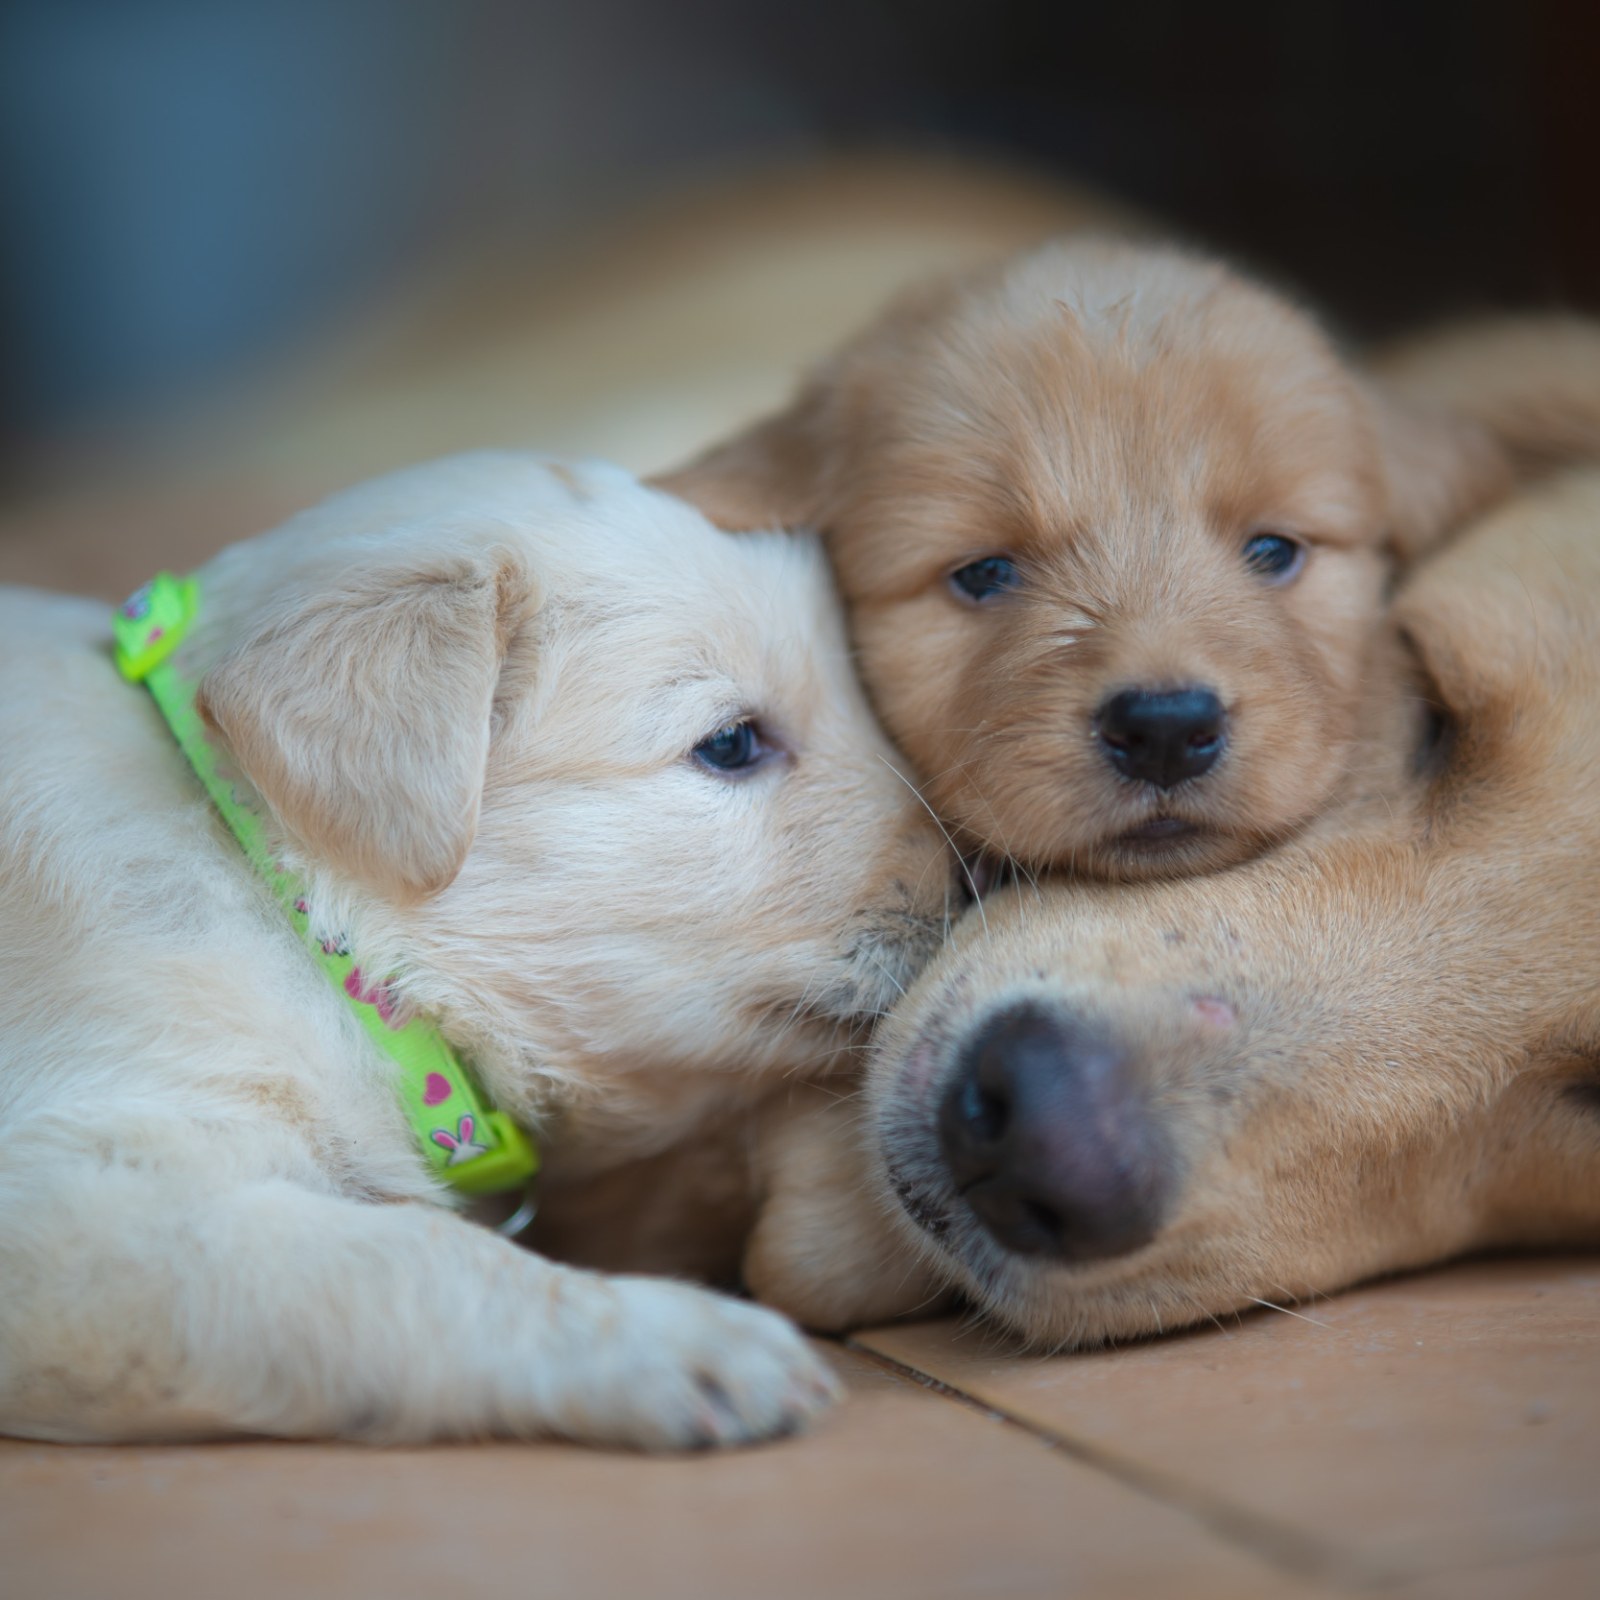 why are golden retriever puppies so cute? 2